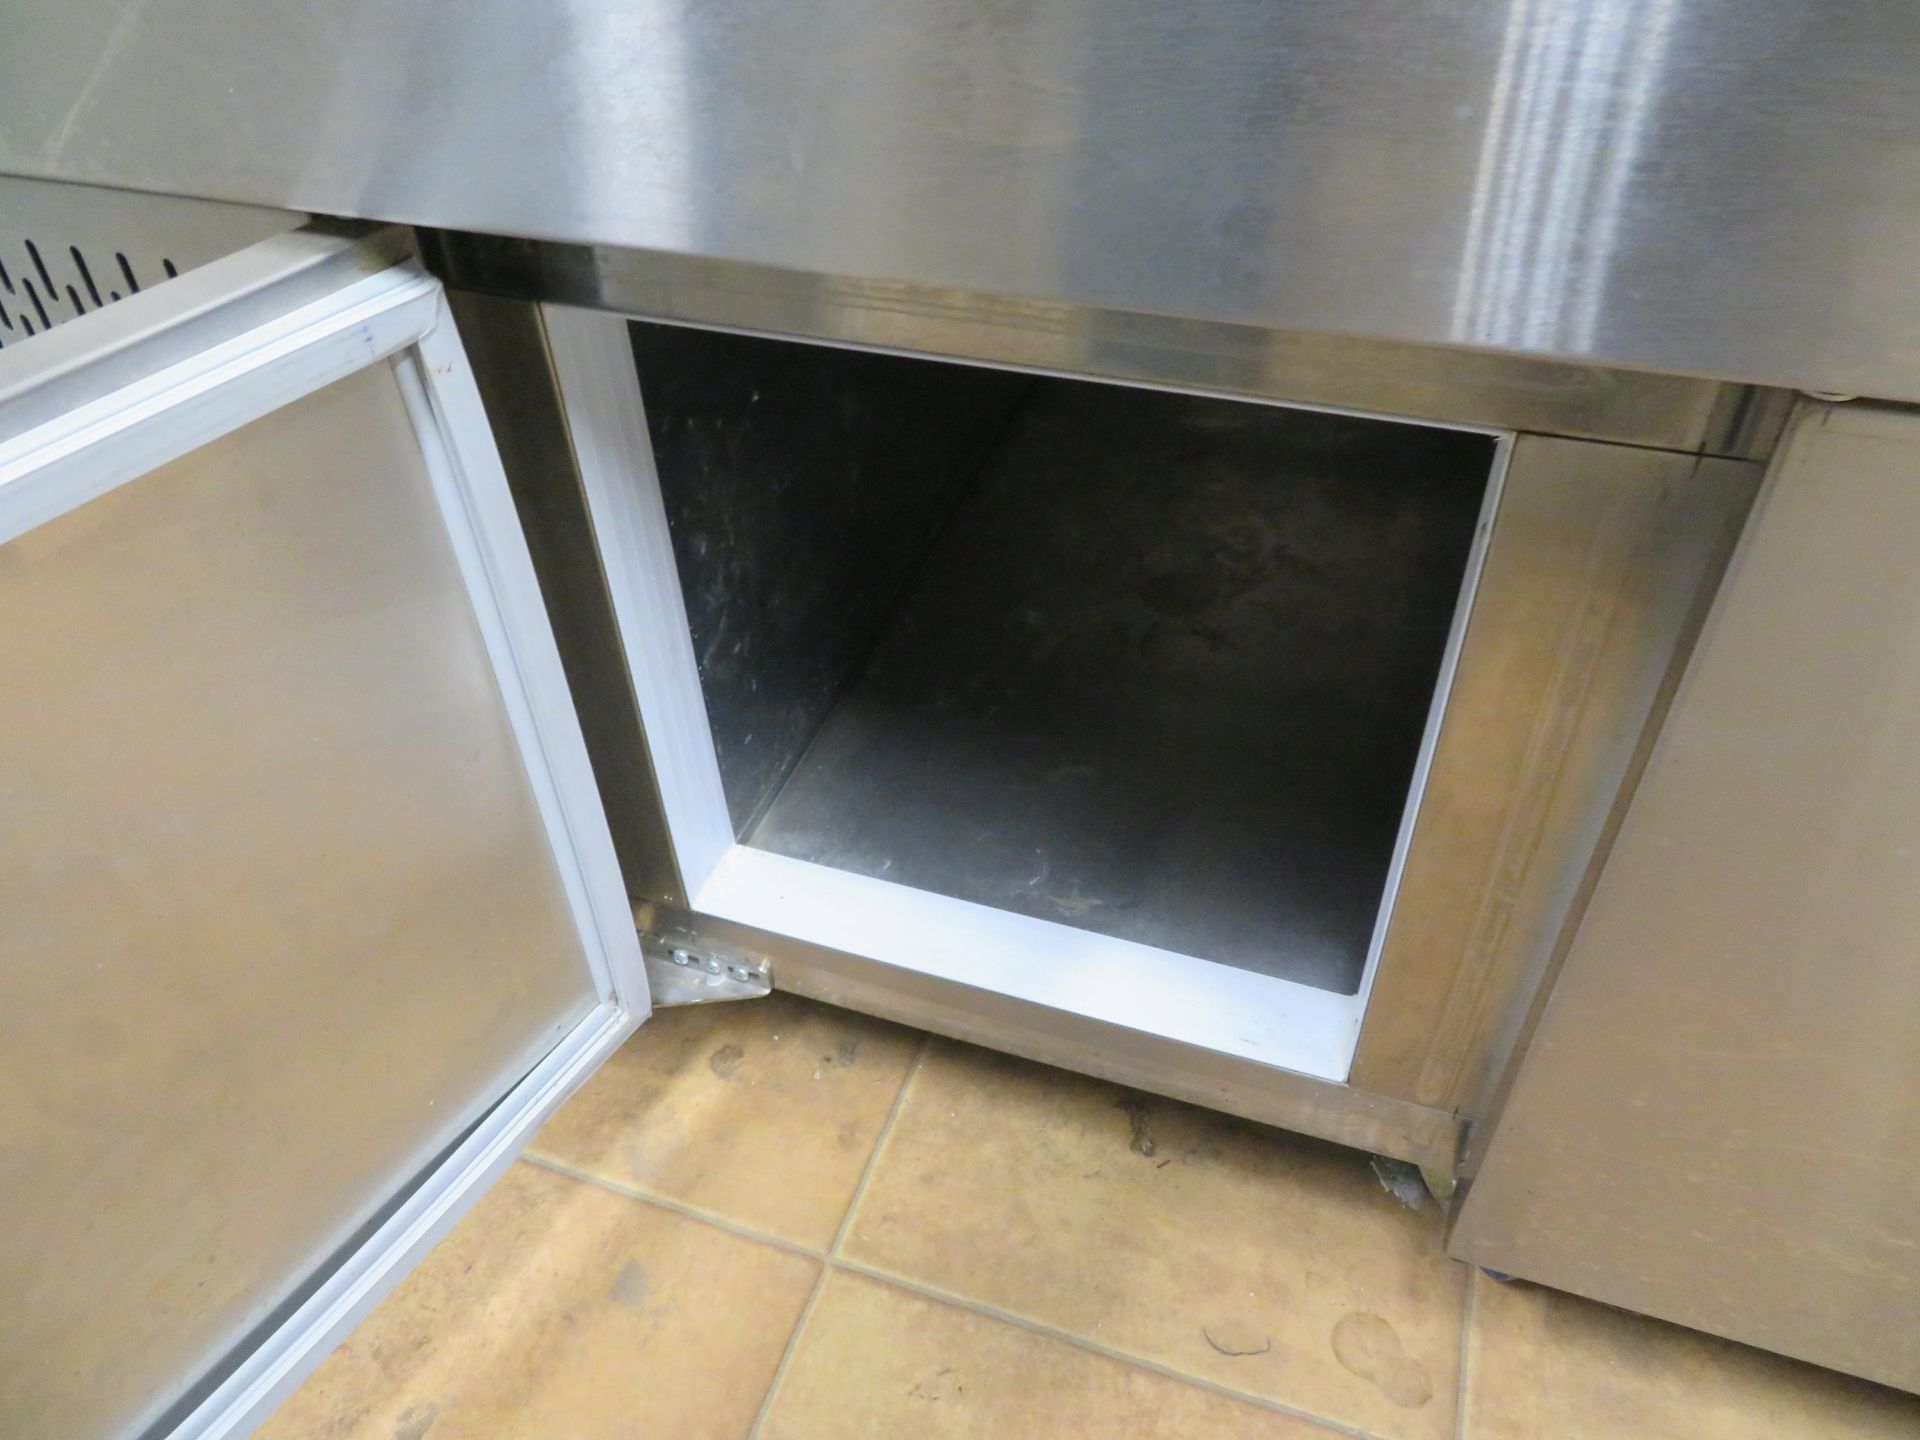 Stainless steel refrigerated display counter on wheels approx. 72"w x 35"d x 54"h - Image 4 of 4